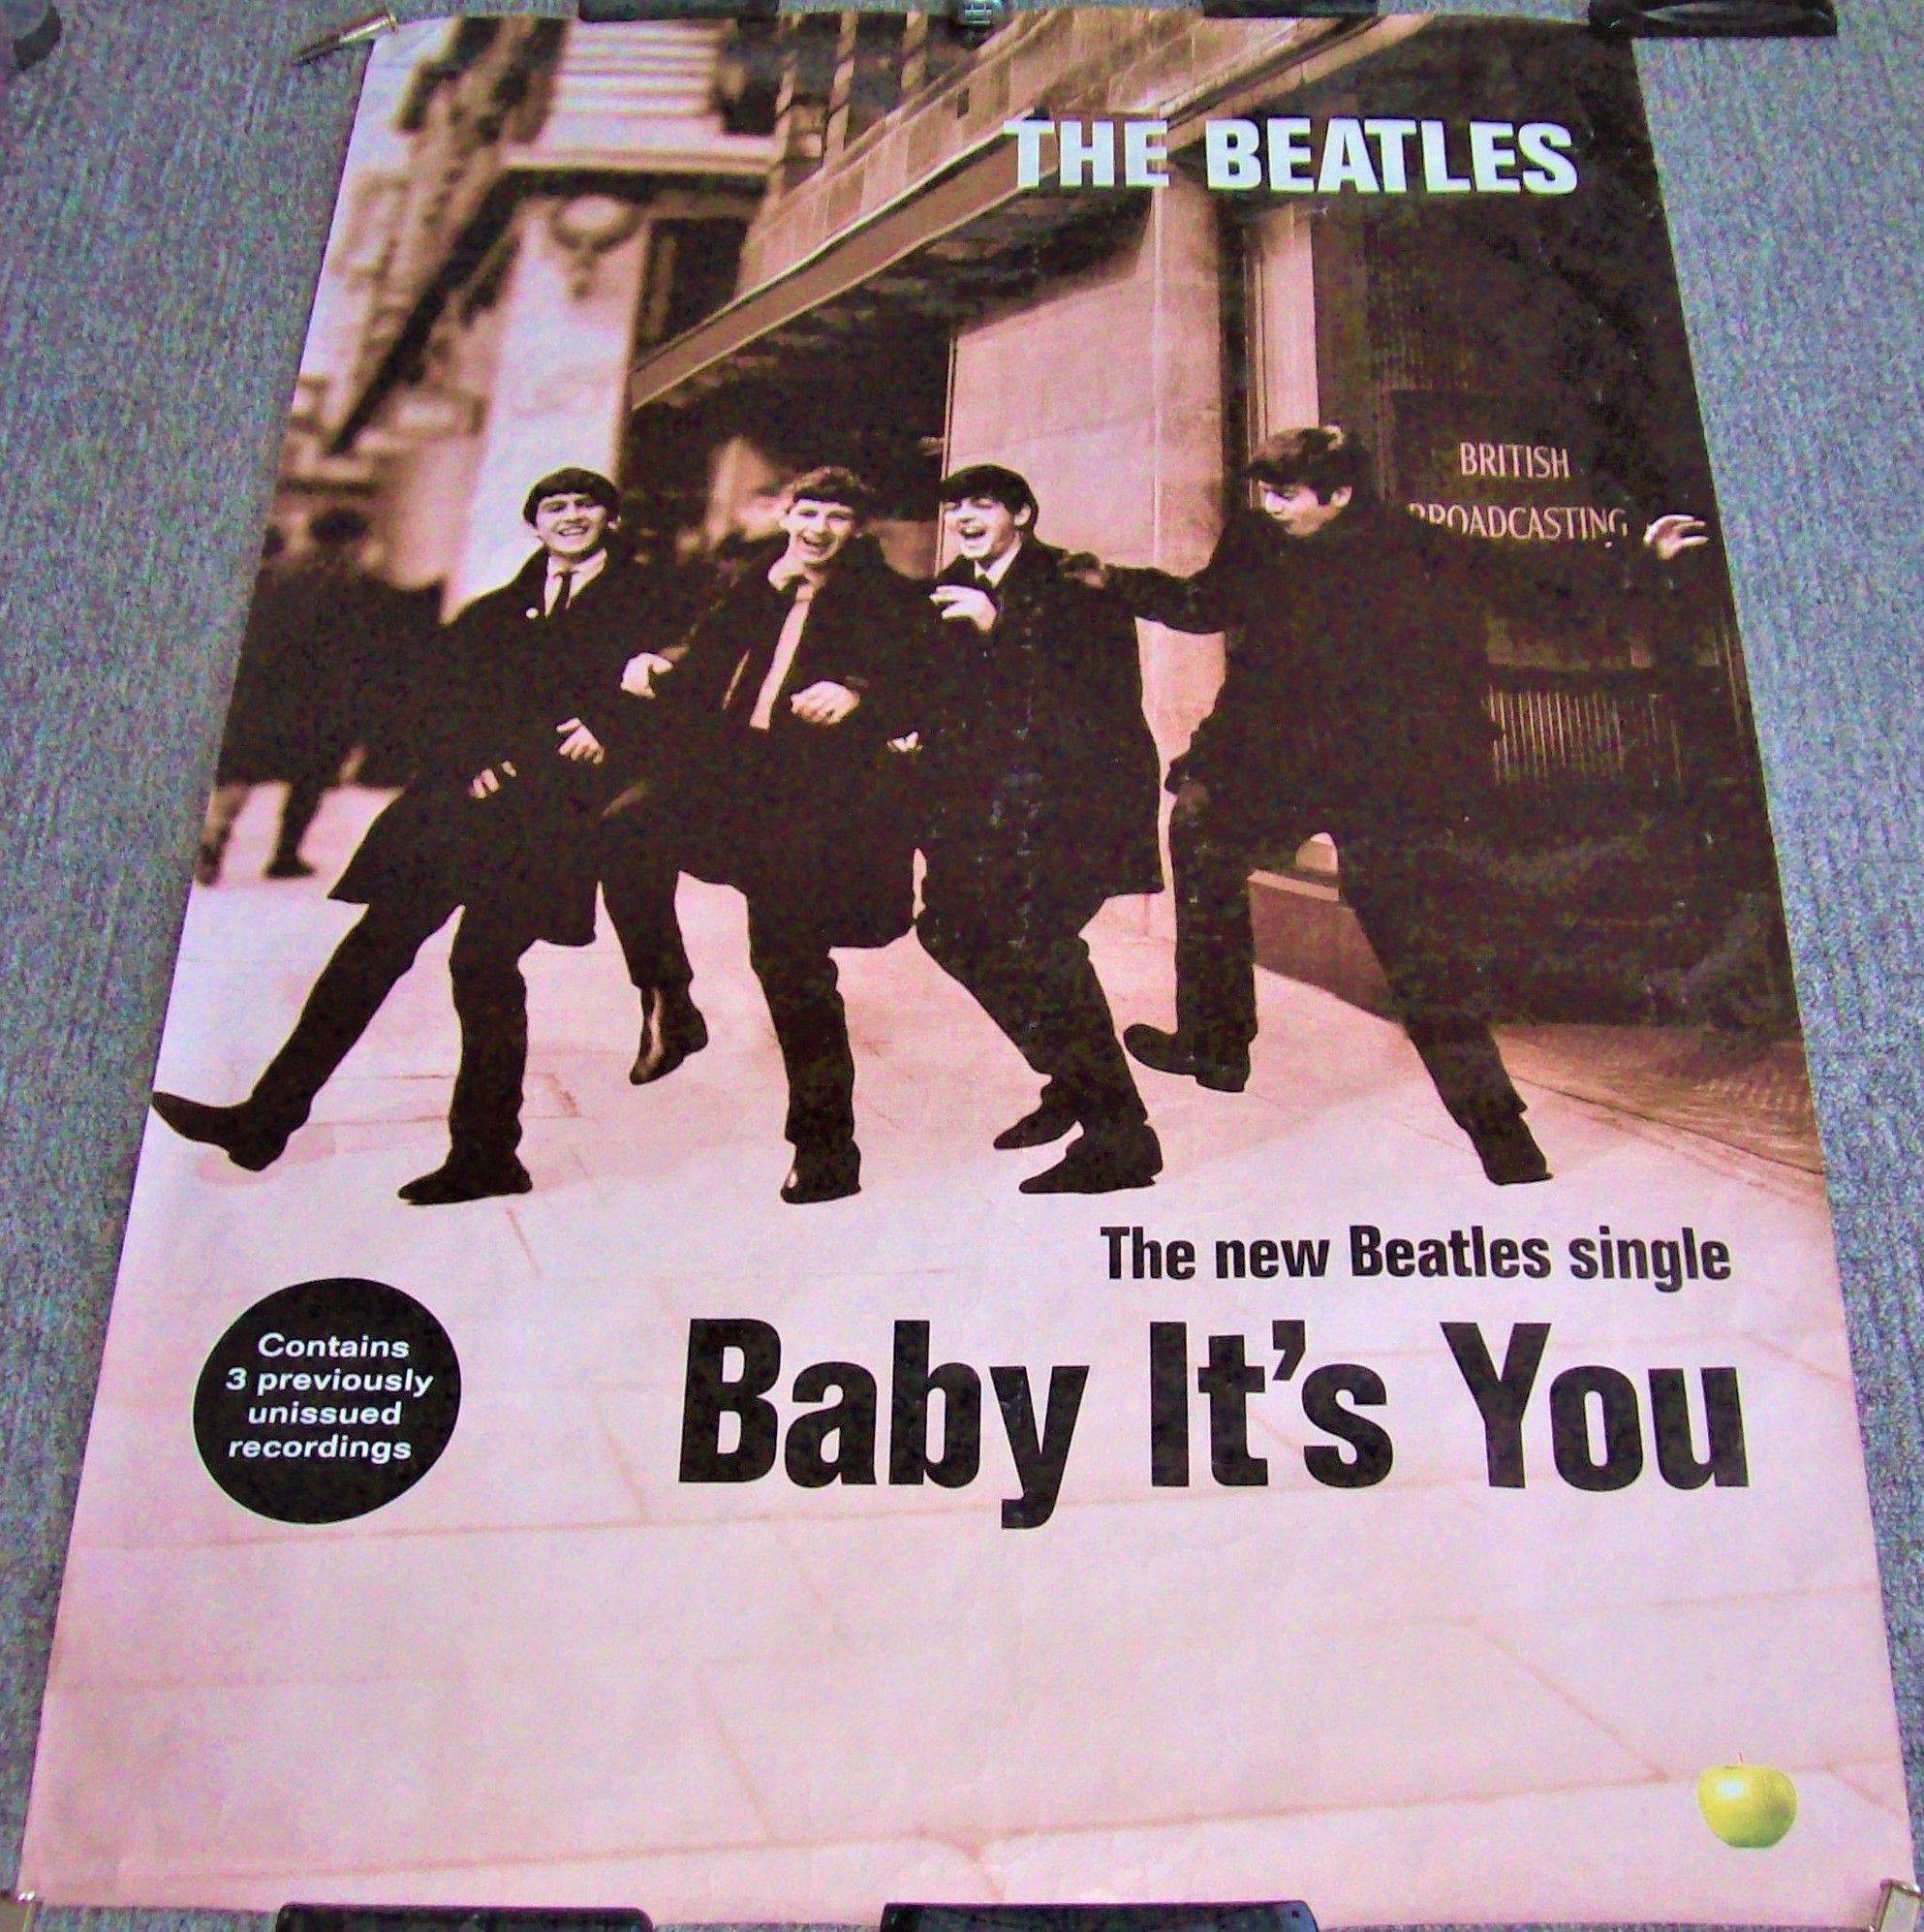 THE BEATLES U.K. RECORD COMPANY PROMO POSTER 'BABY IT'S YOU' SINGLE 1995